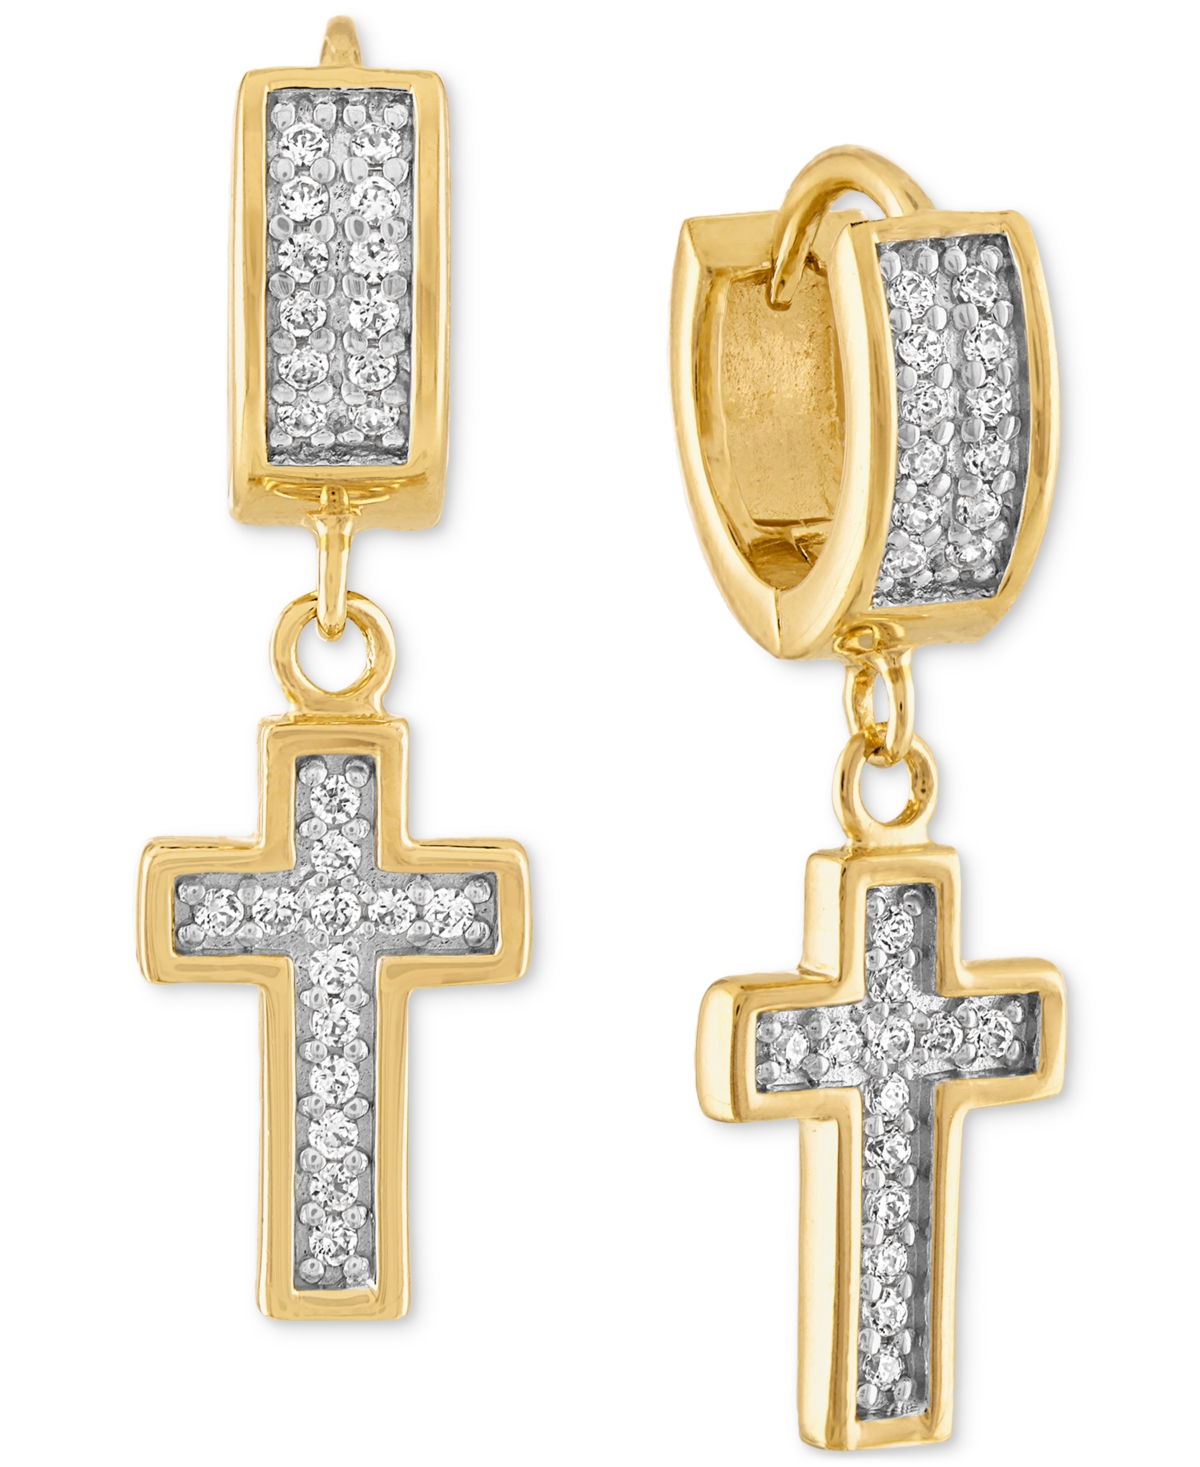 Esquire Men's Jewelry Cubic Zirconia Cross Dangle Huggie Hoop Earrings In 14k Gold-plated Sterling Silver, Created For Mac In Gold Over Silver